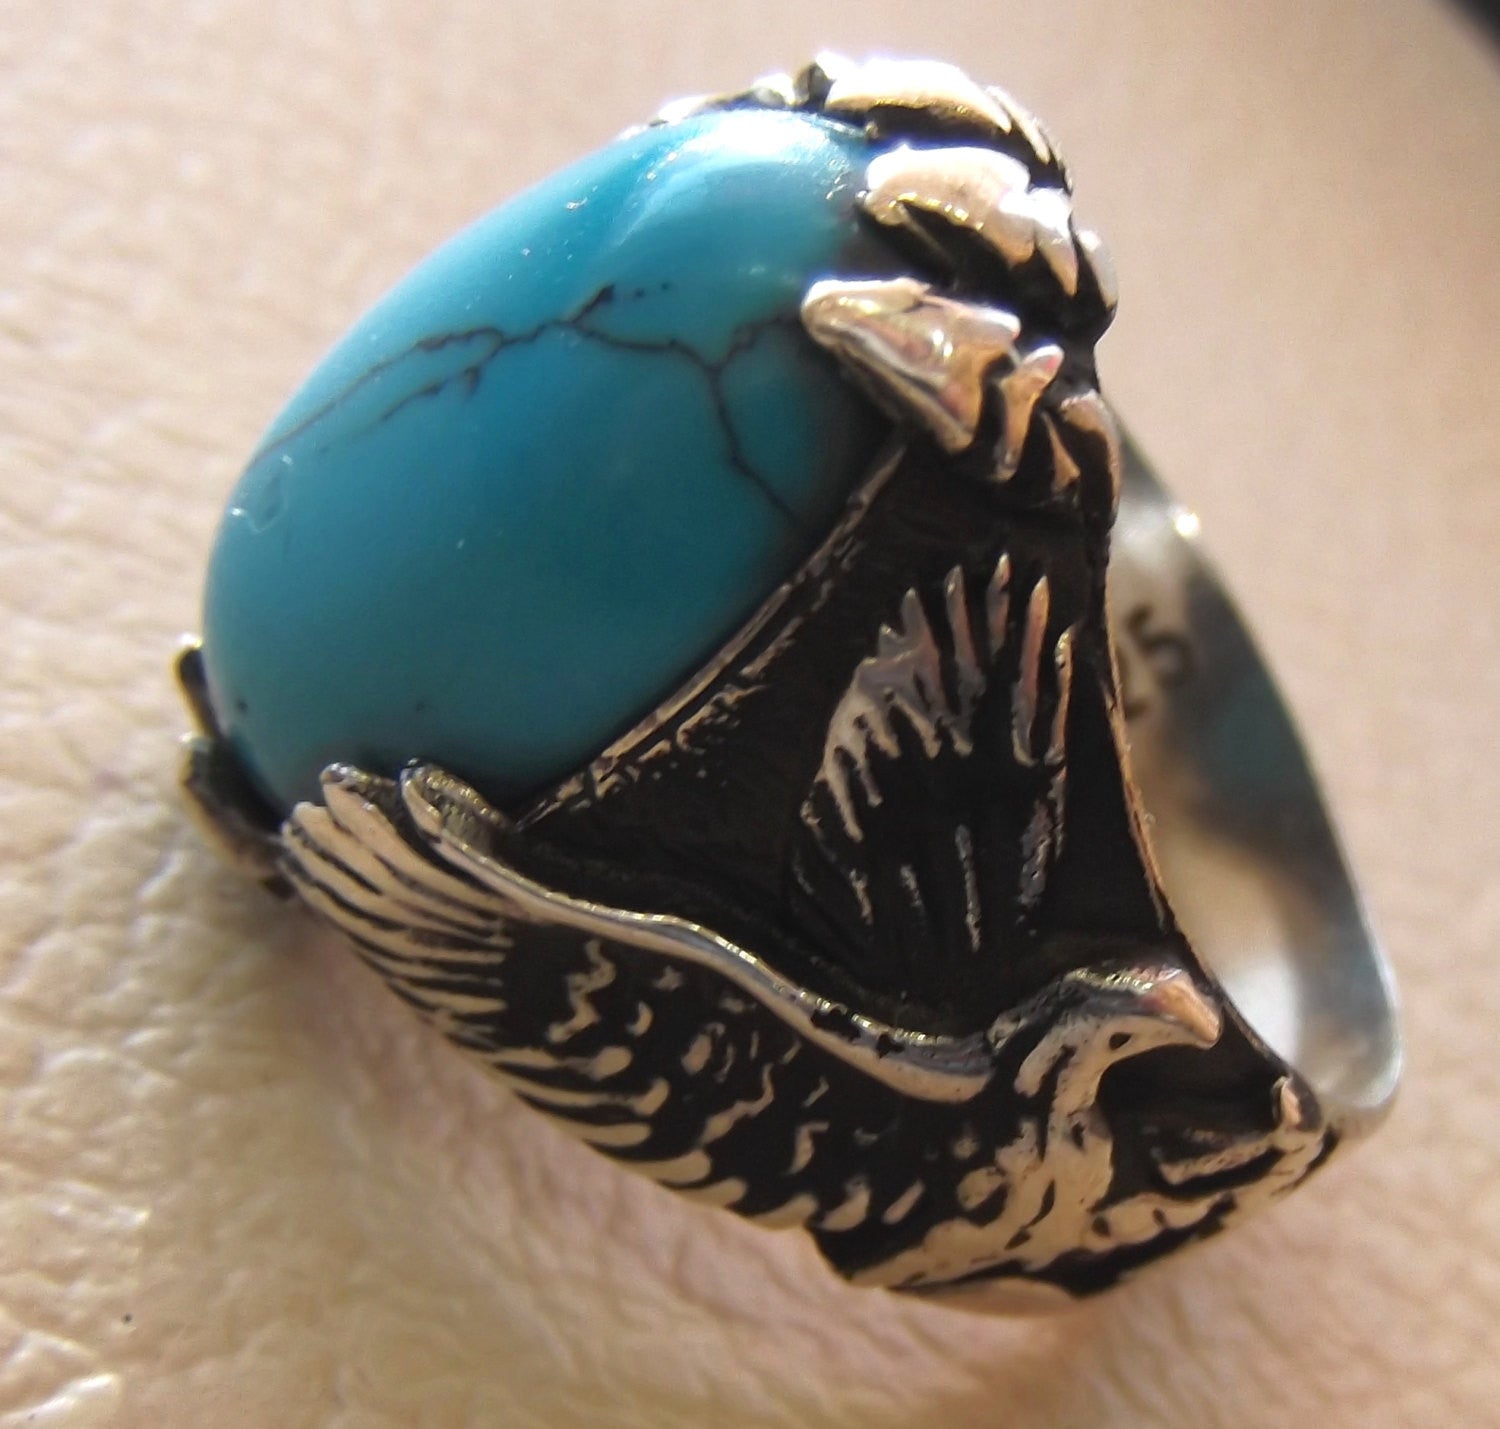 blue turquoise cabochon stone sterling silver 925 men ring vintage eagle style  animal jewelry oval stone all sizes fast shipping